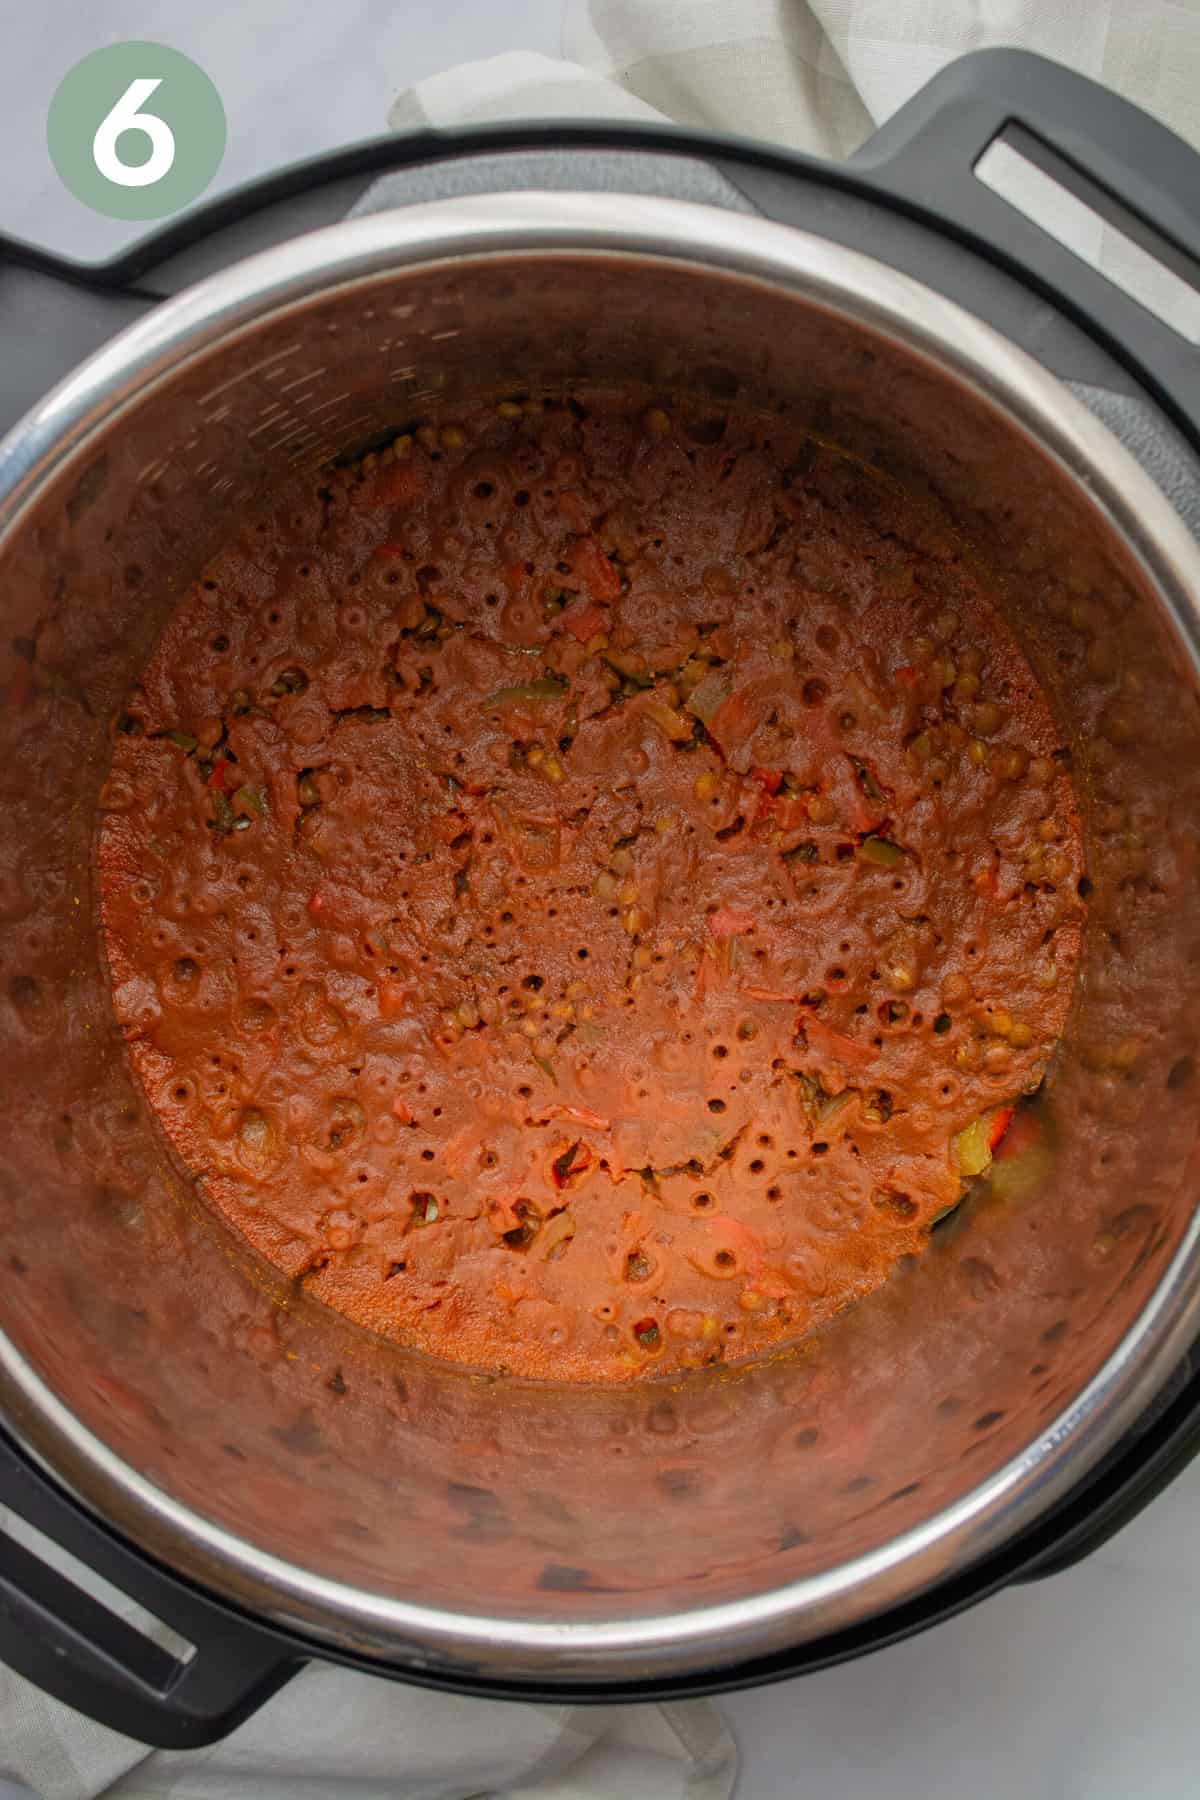 Cooked tomato sauce and lentils in the Instant Pot.